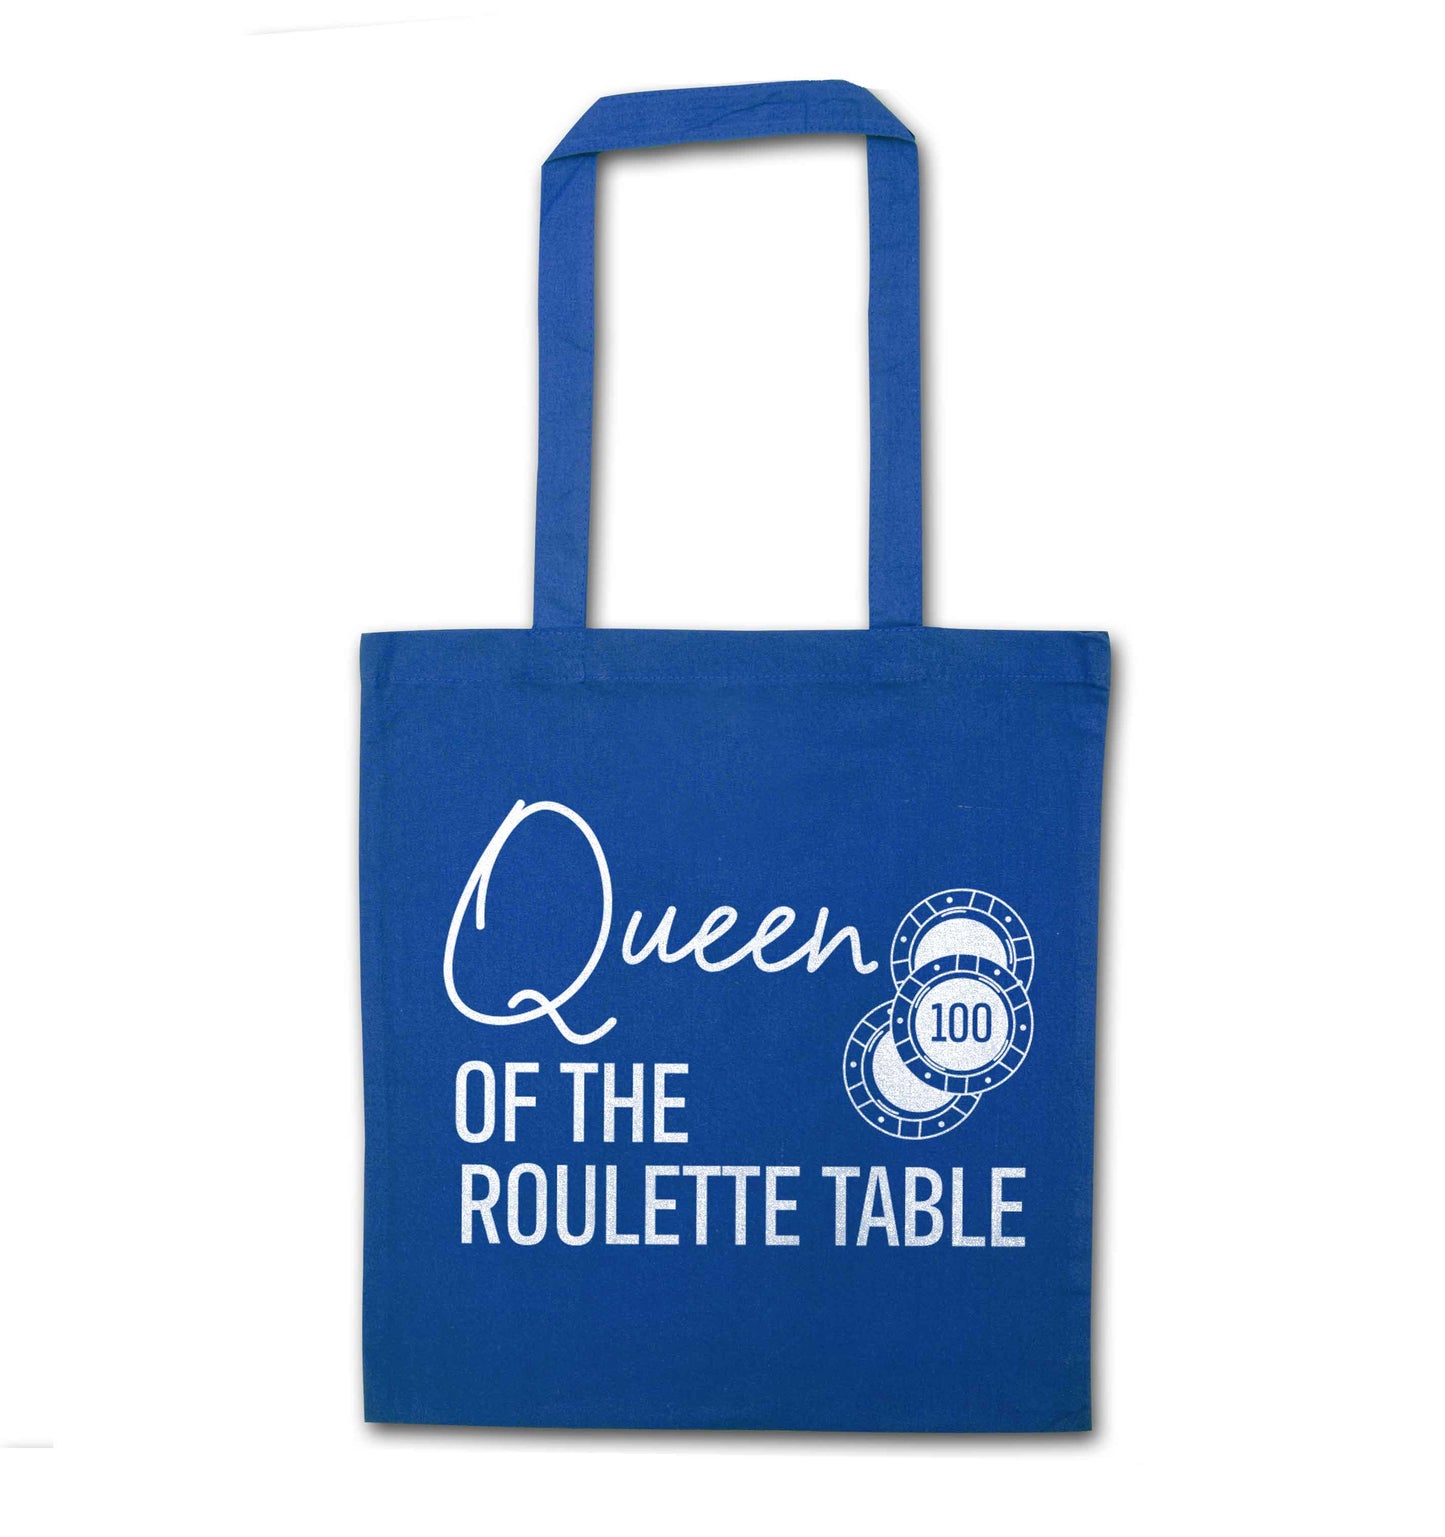 Queen of the roulette table blue tote bag